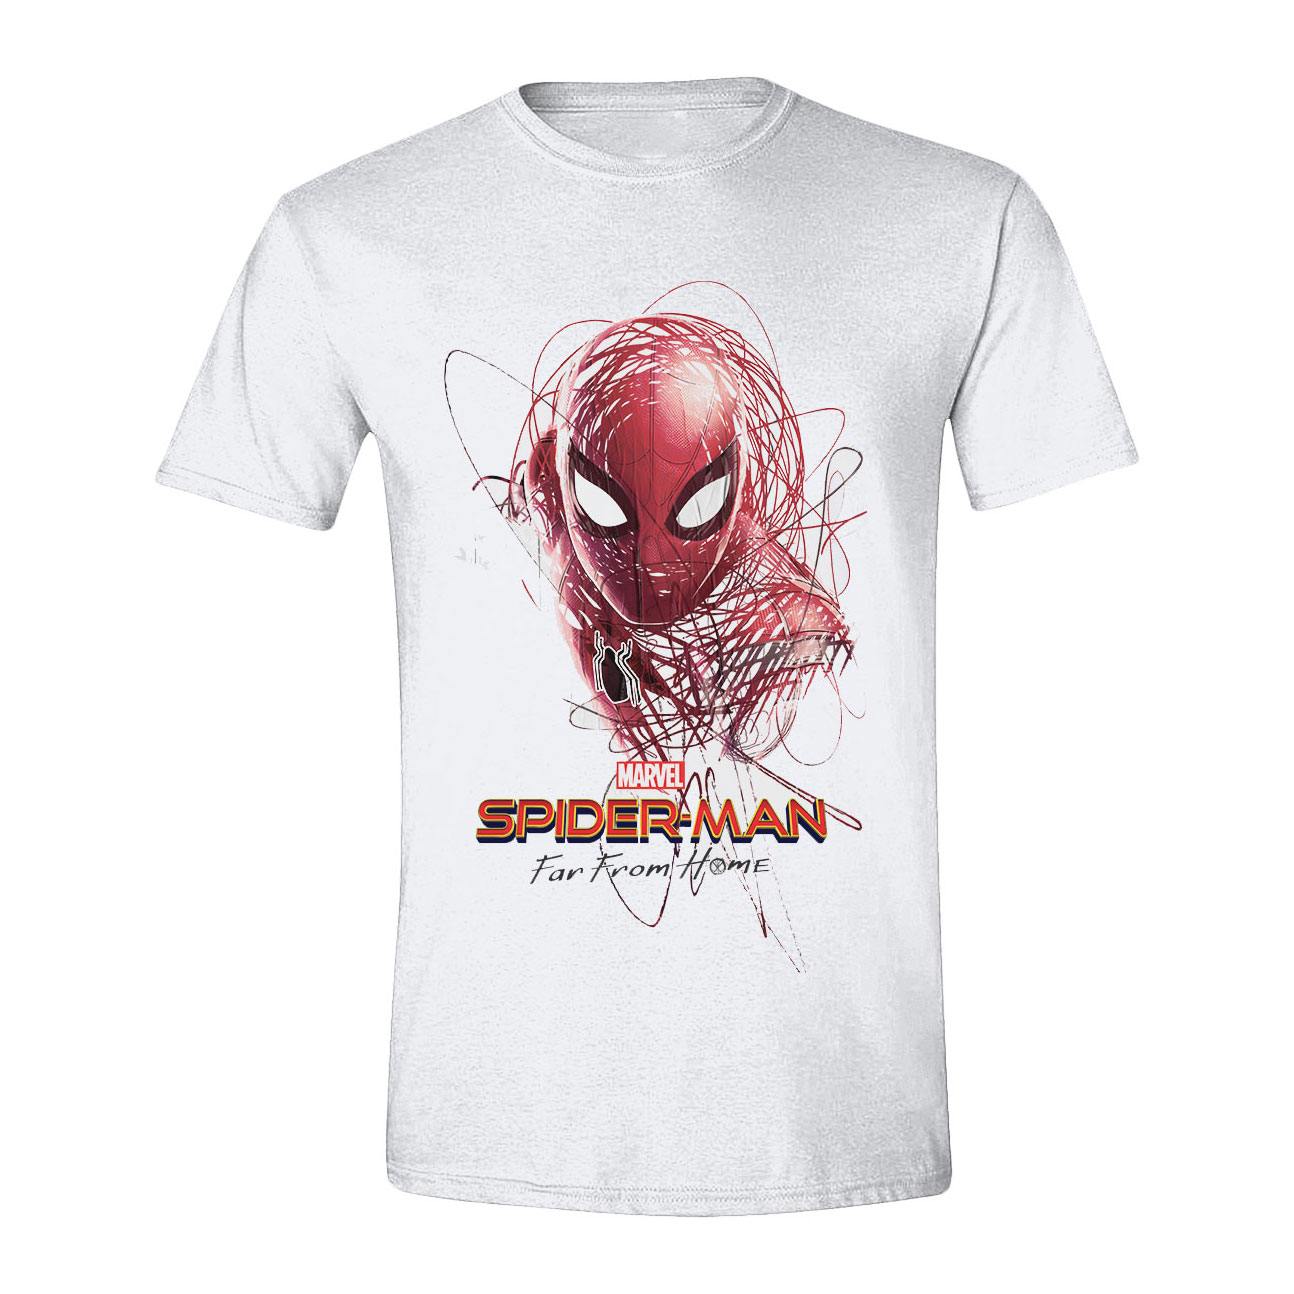 Spider-Man : Far From Home T-Shirt Sketched Hero (M)